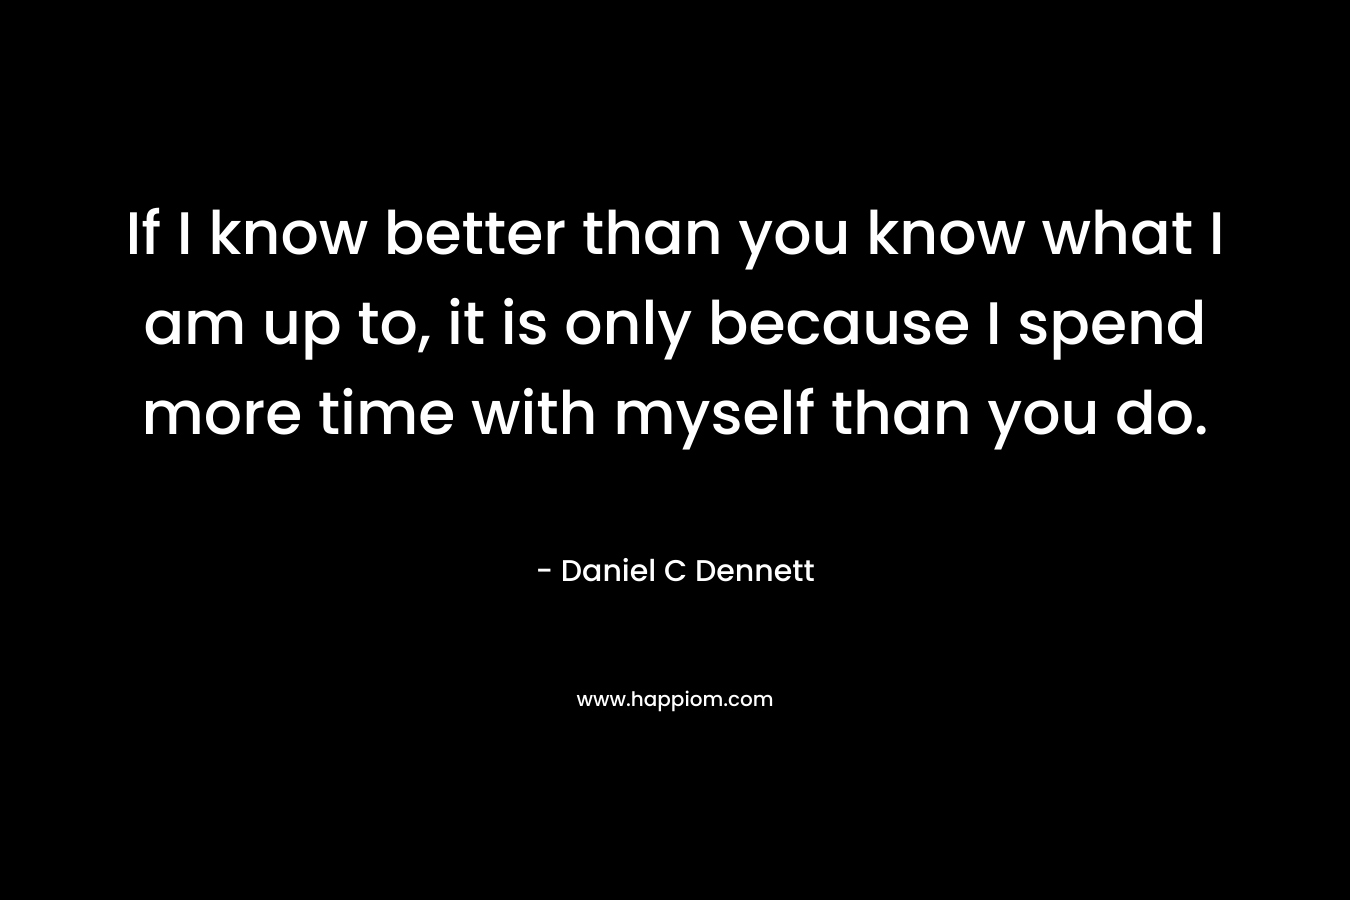 If I know better than you know what I am up to, it is only because I spend more time with myself than you do.